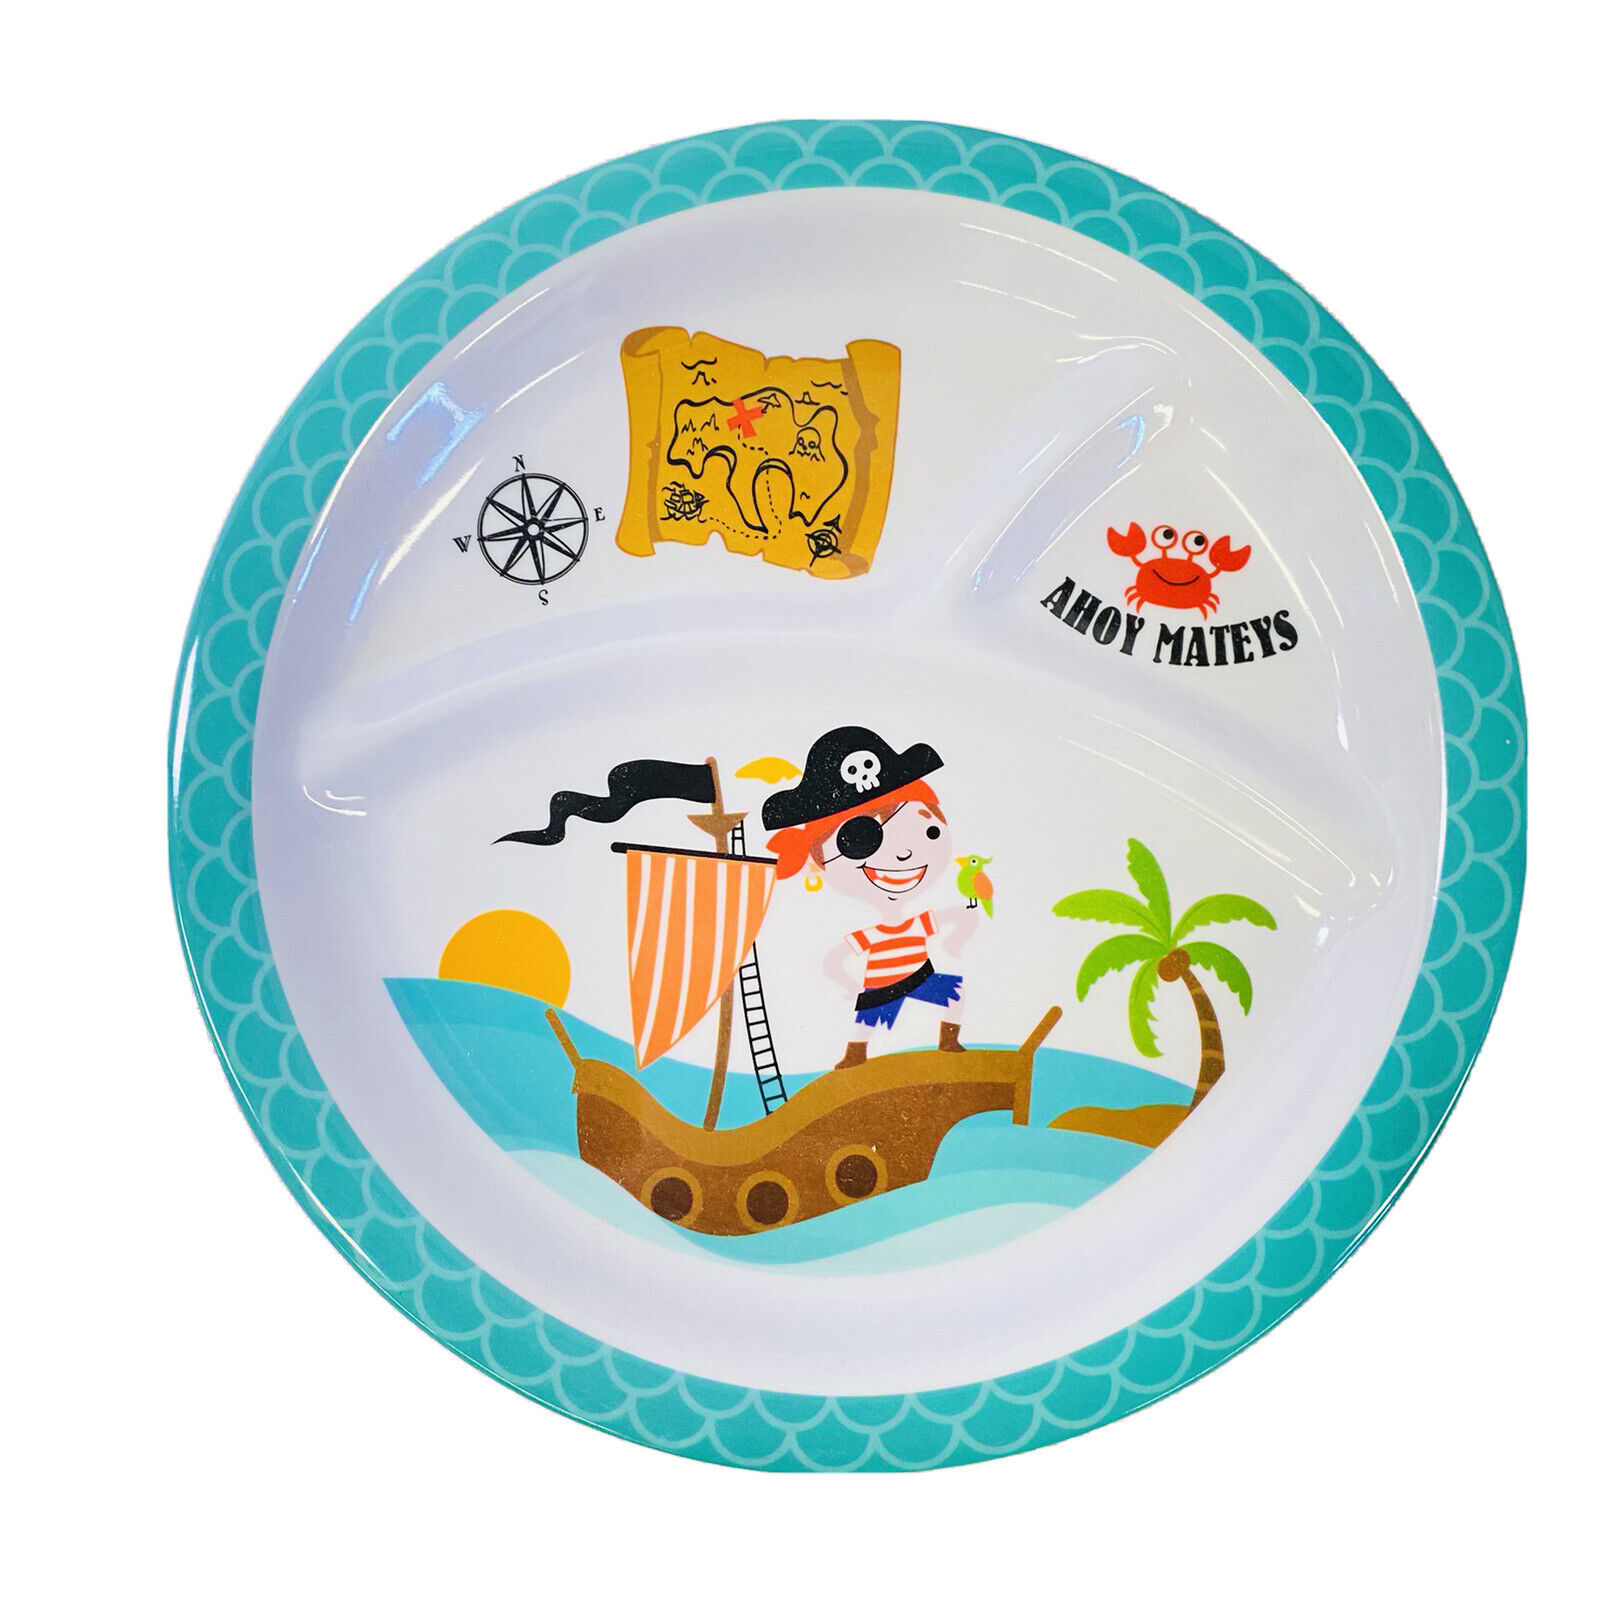 Child's Boy's Dinnerware Divided Plate Bowl & Cup Set Melamine BPA Free Pirates Regent Products n/a - фотография #2